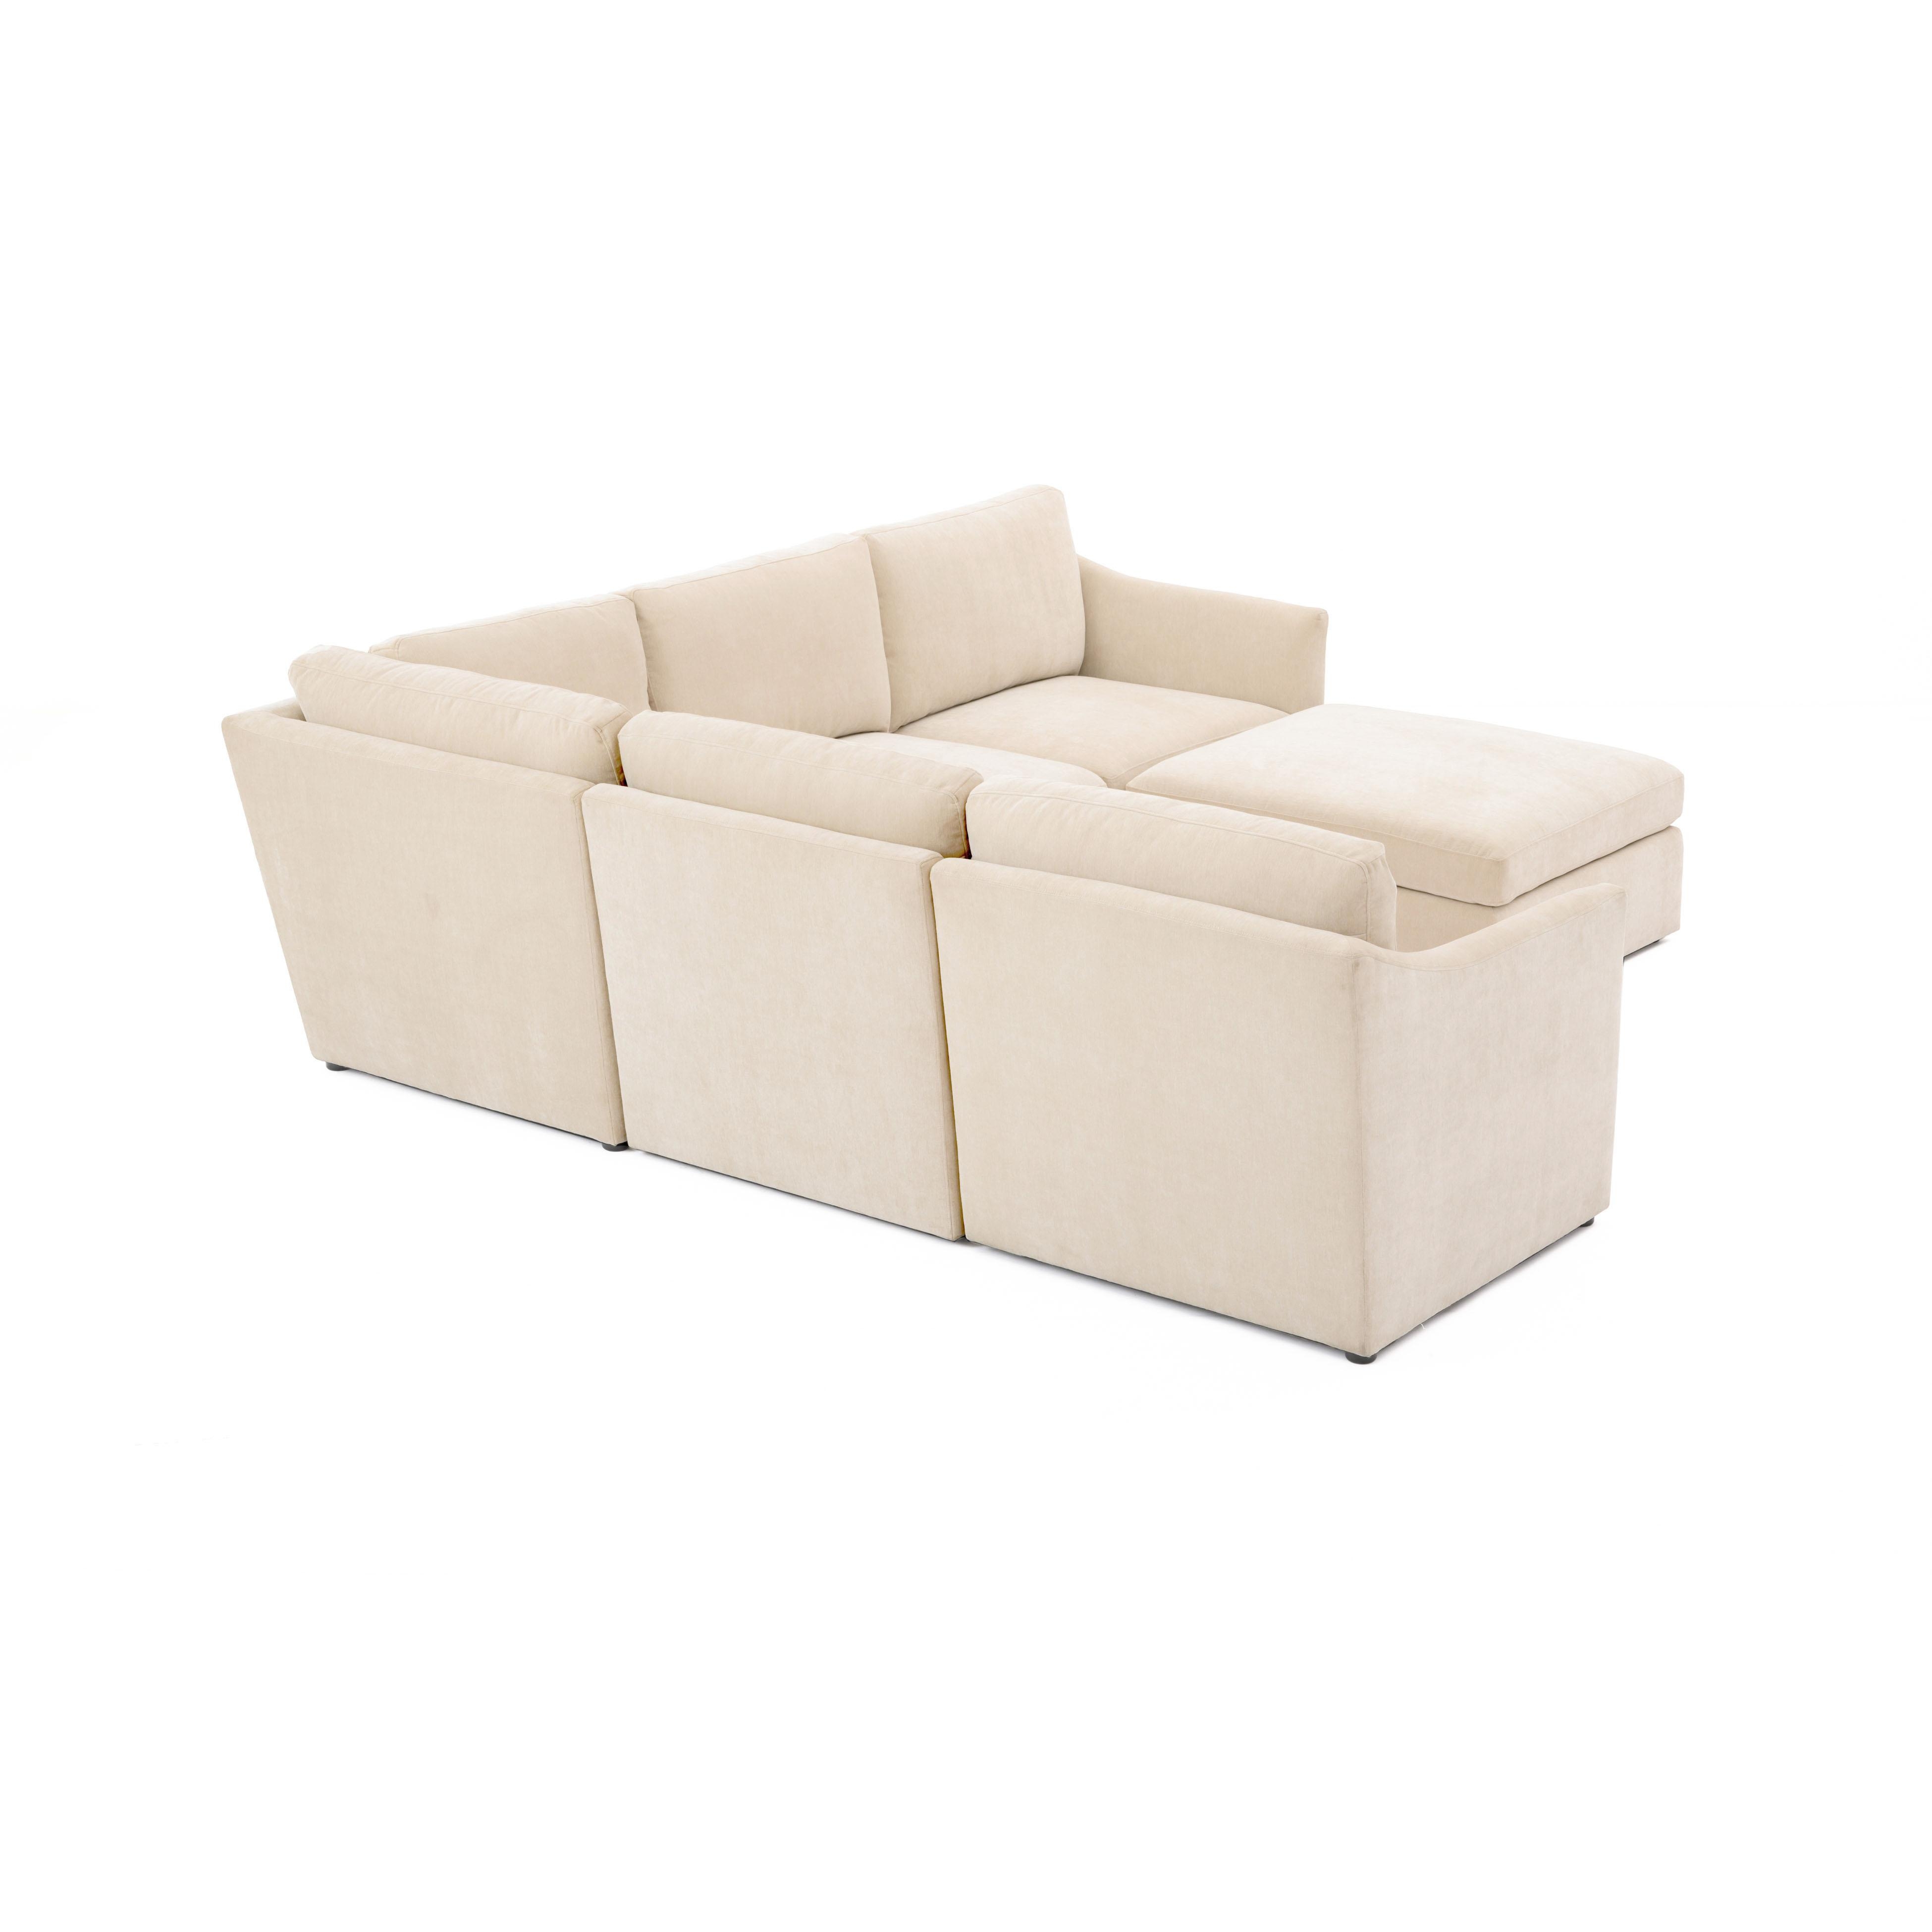 Aiden Beige Modular Chaise Sectional - Image 4